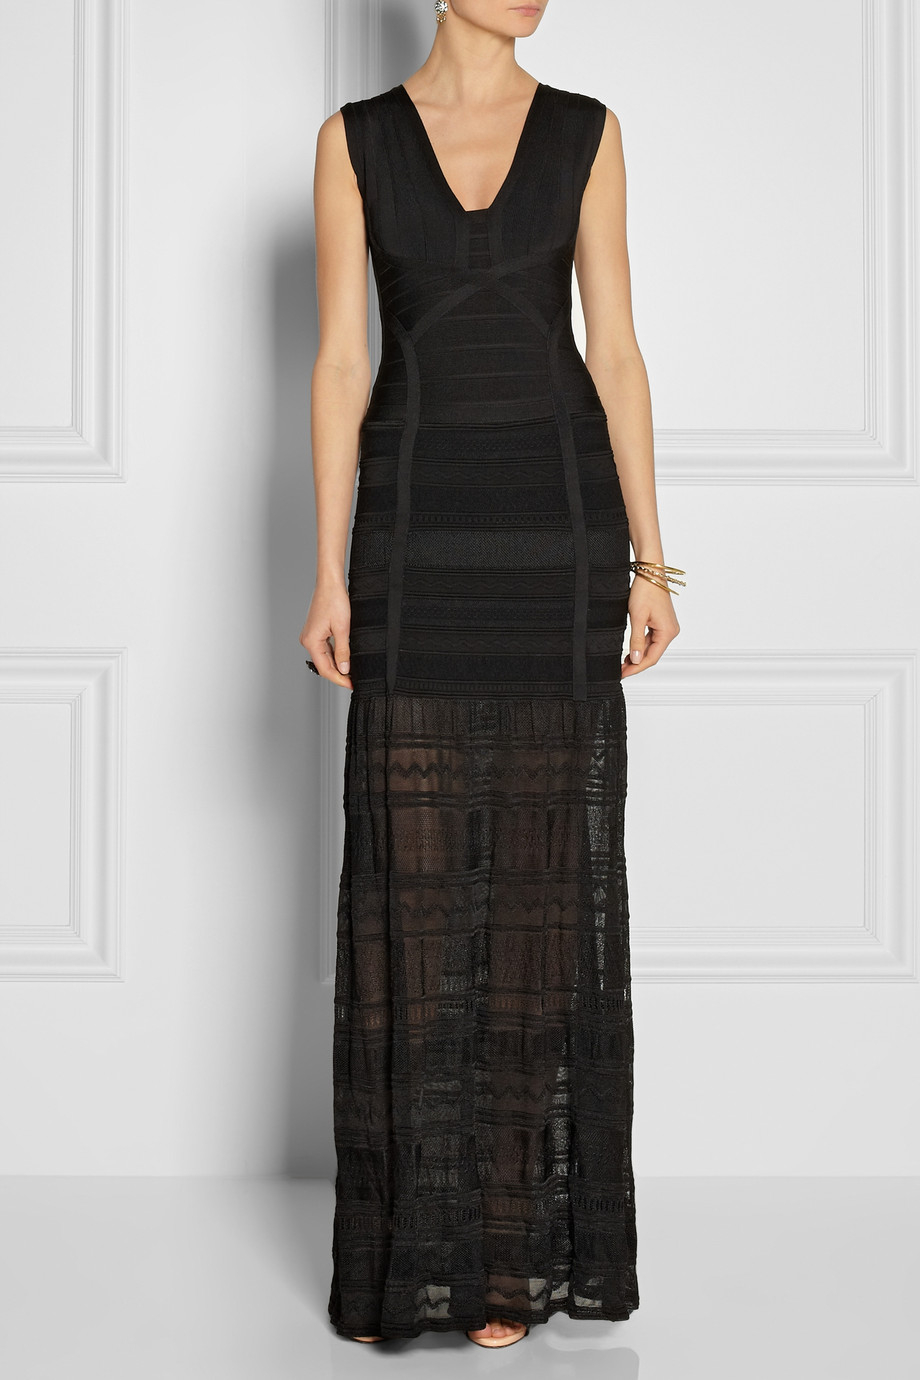 Hervé léger Miriam Bandage and Pointelle Gown in Black | Lyst